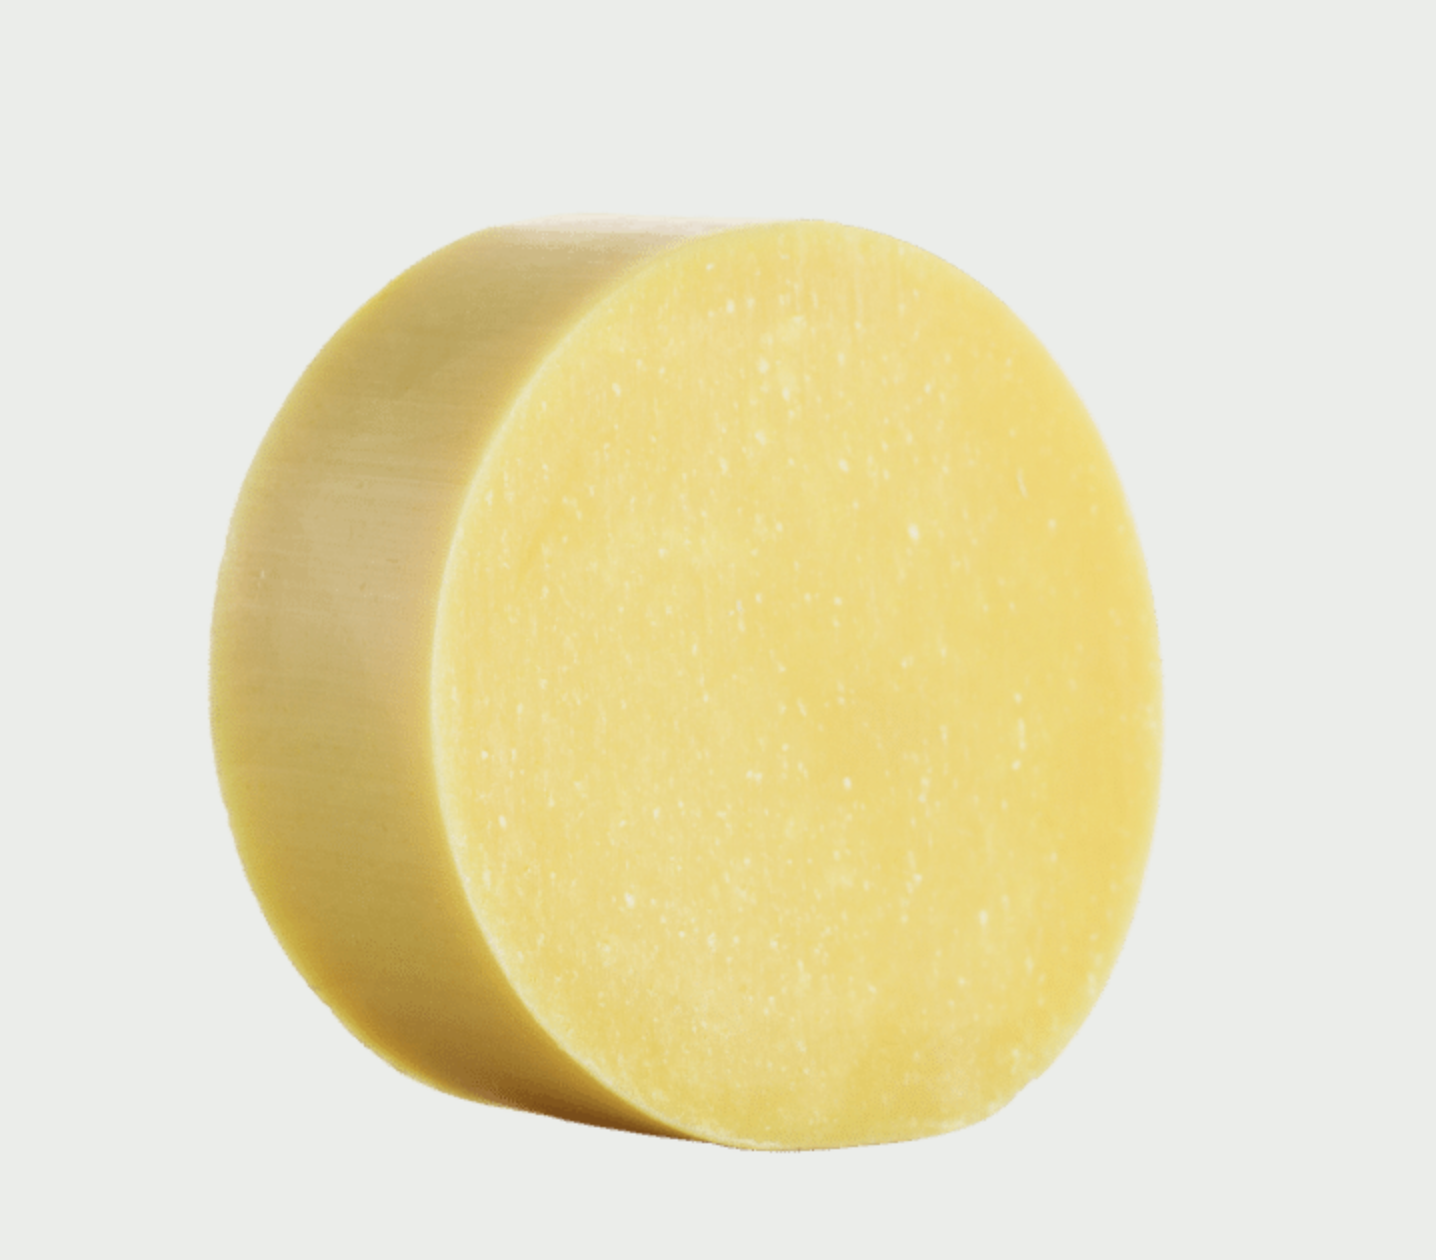 Seed & Sprout - The Shampoo Bar (Citrus & Mint)